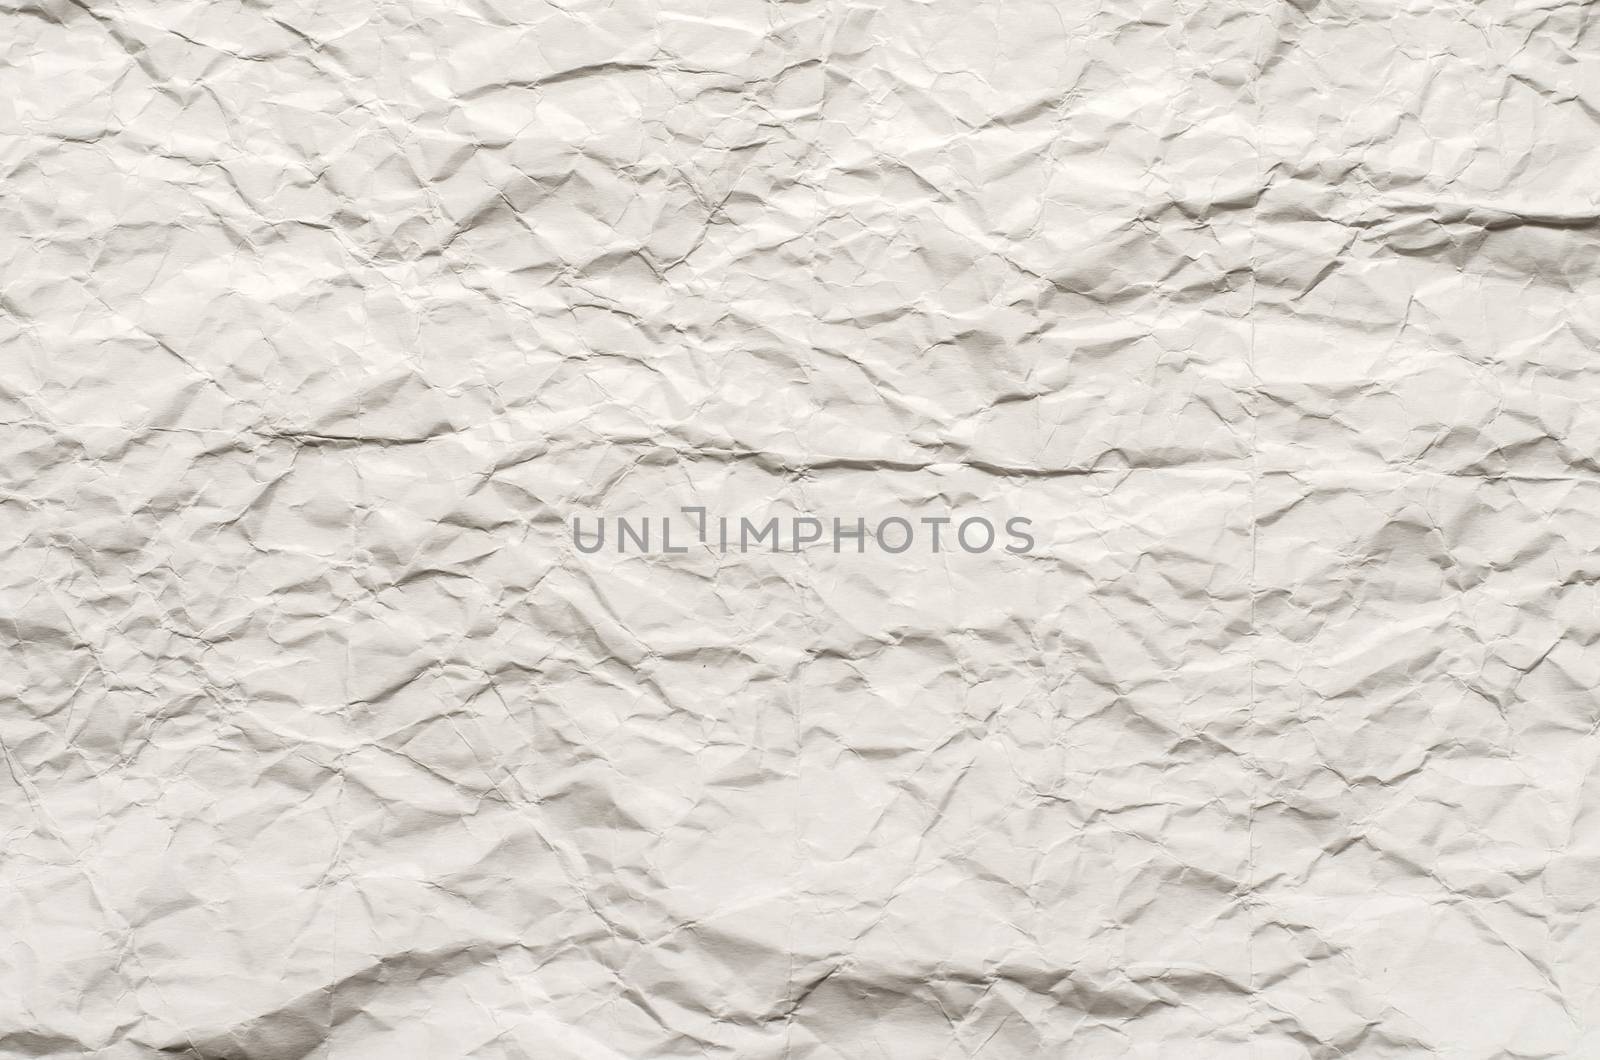 texture of crumpled paper background